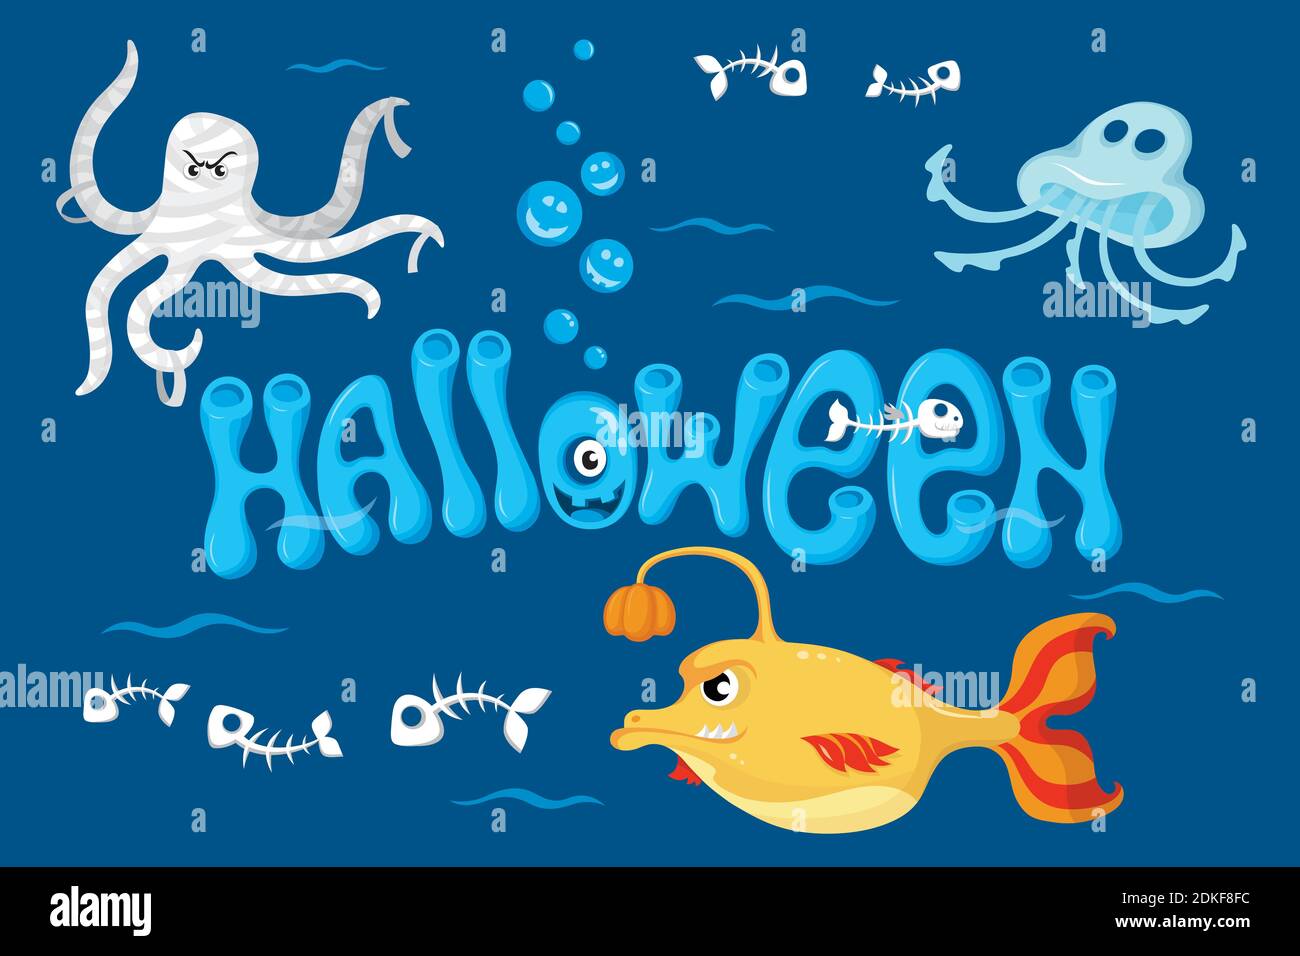 Halloween illustration with lettering and monsters. Vector illustration. Stock Vector